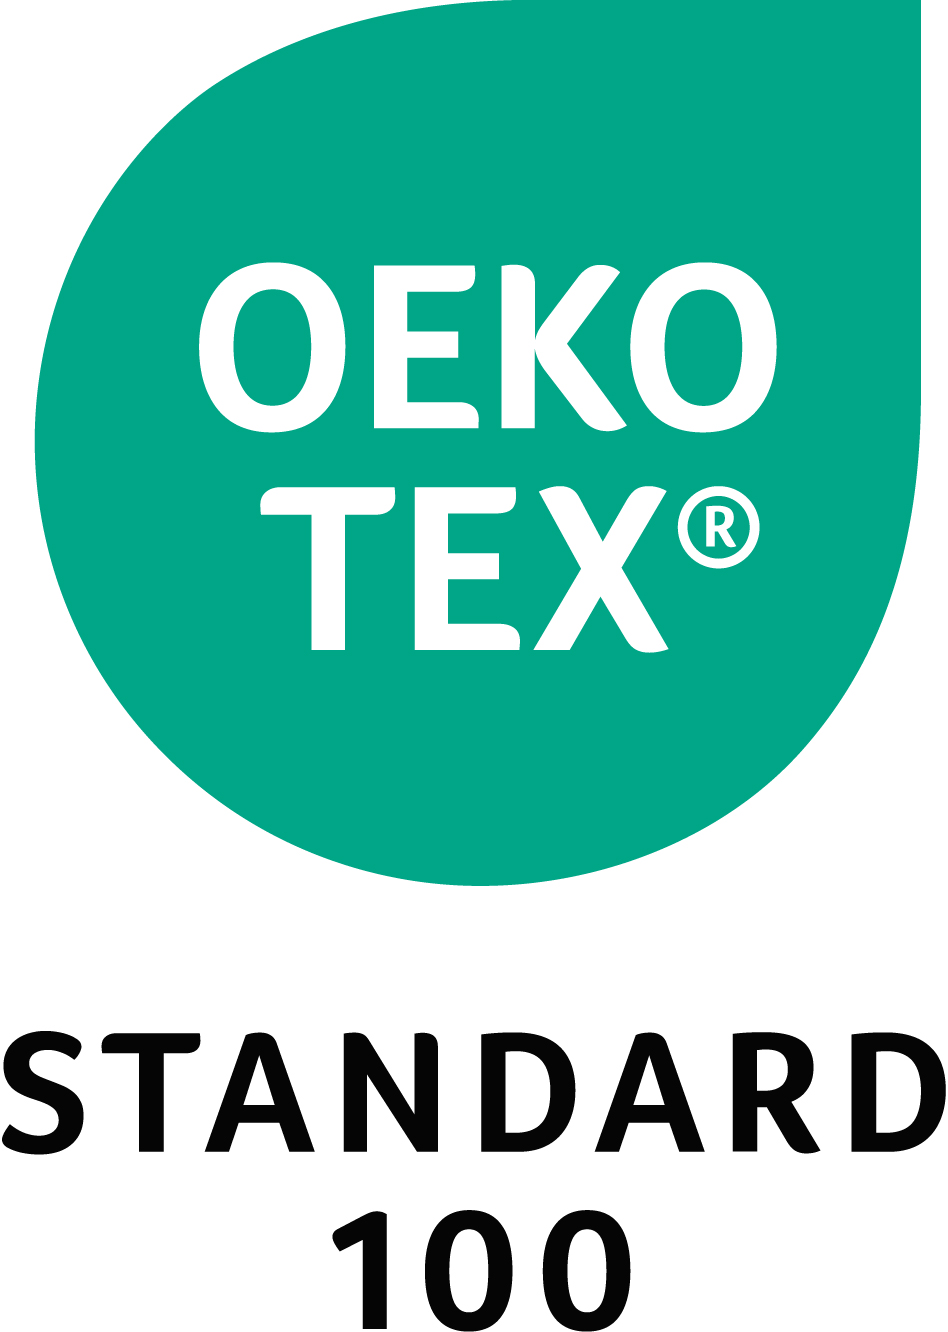 Logo of the OEKO-TEX Standard 100, the label that certifies that Subrenat textiles are free of substances that are harmful to health